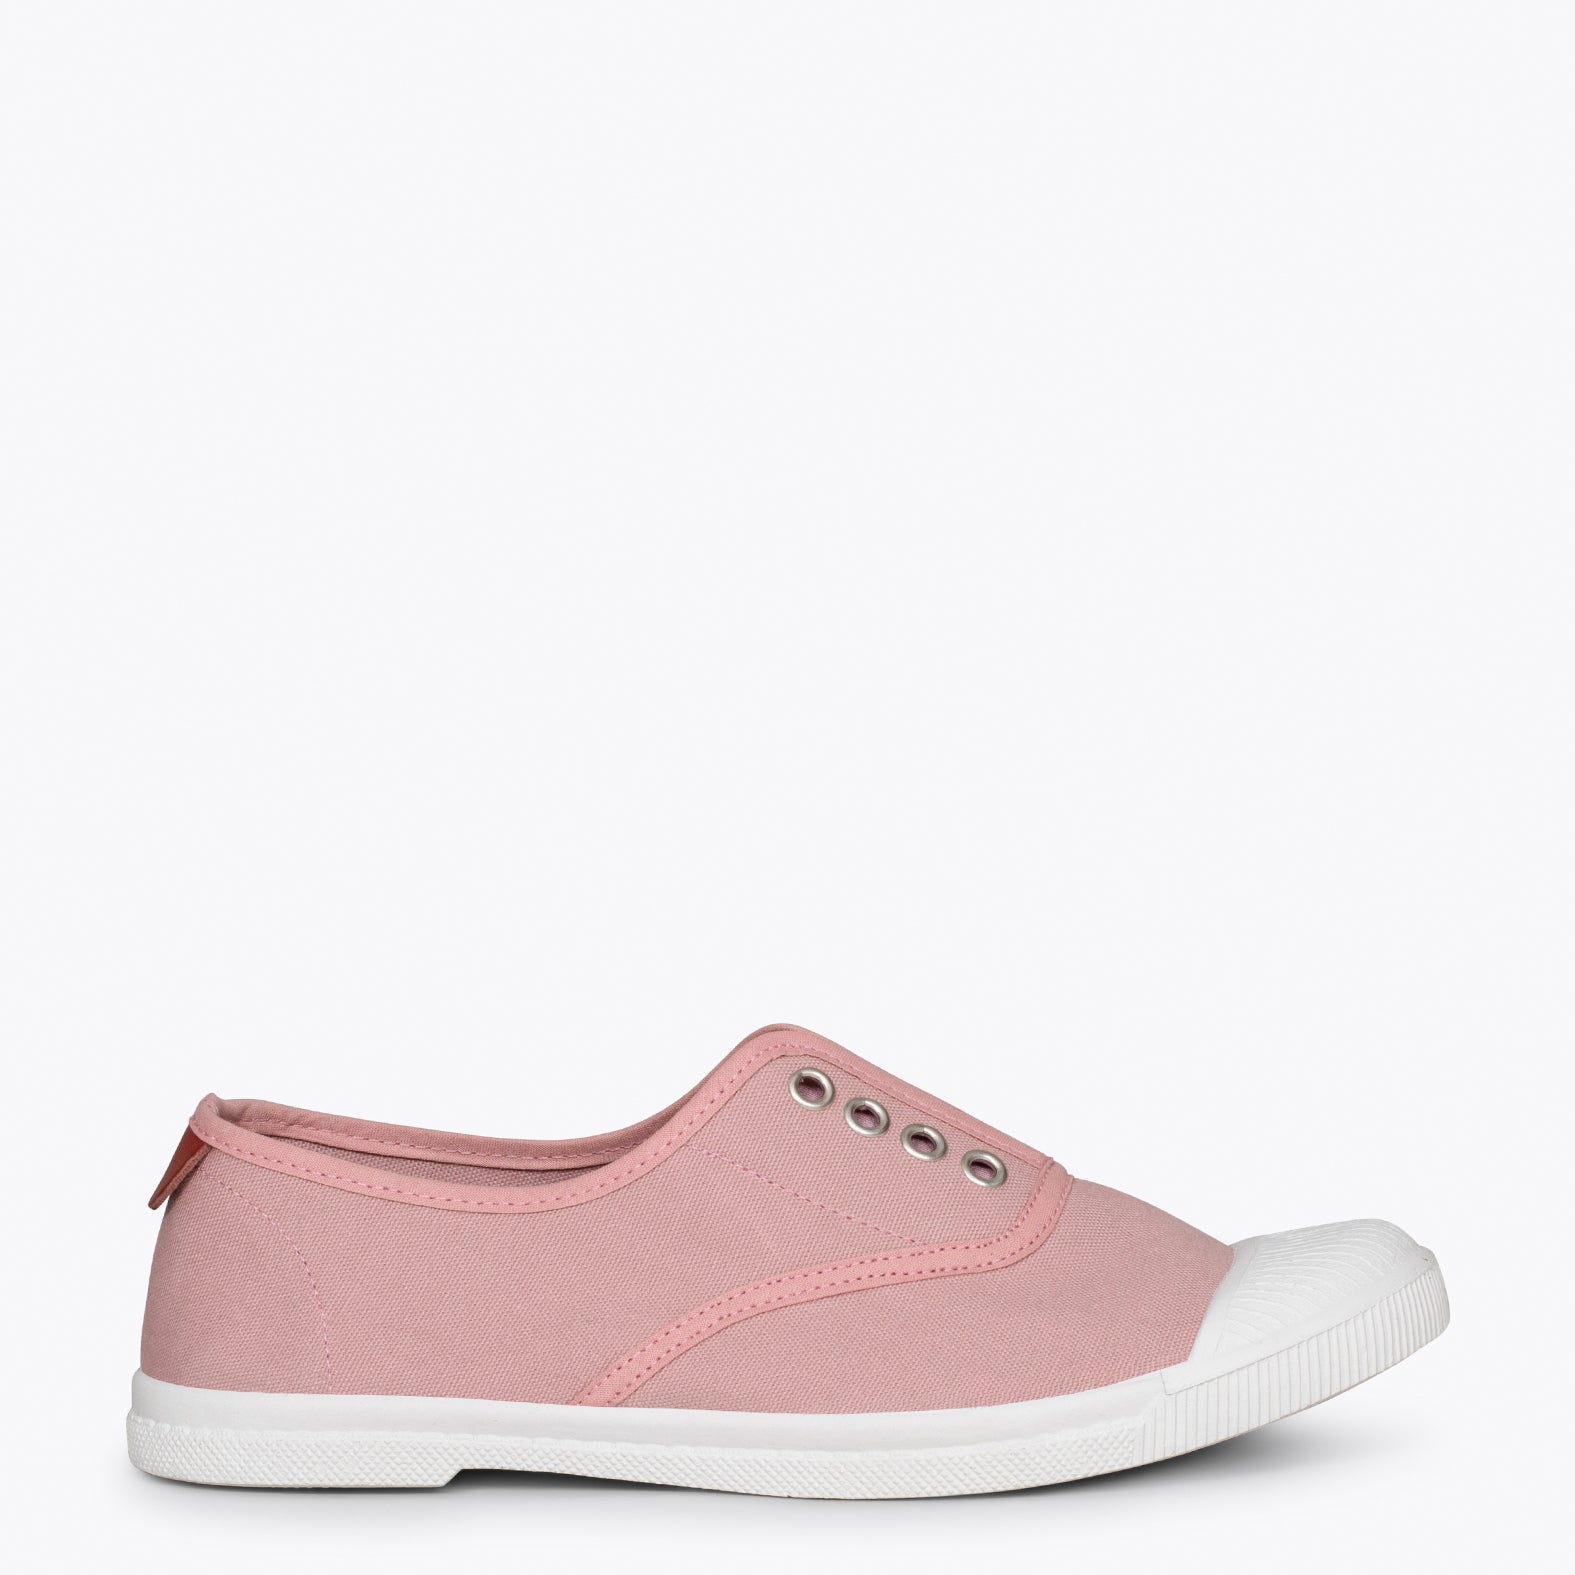 WAY – PINK sneakers with elastic